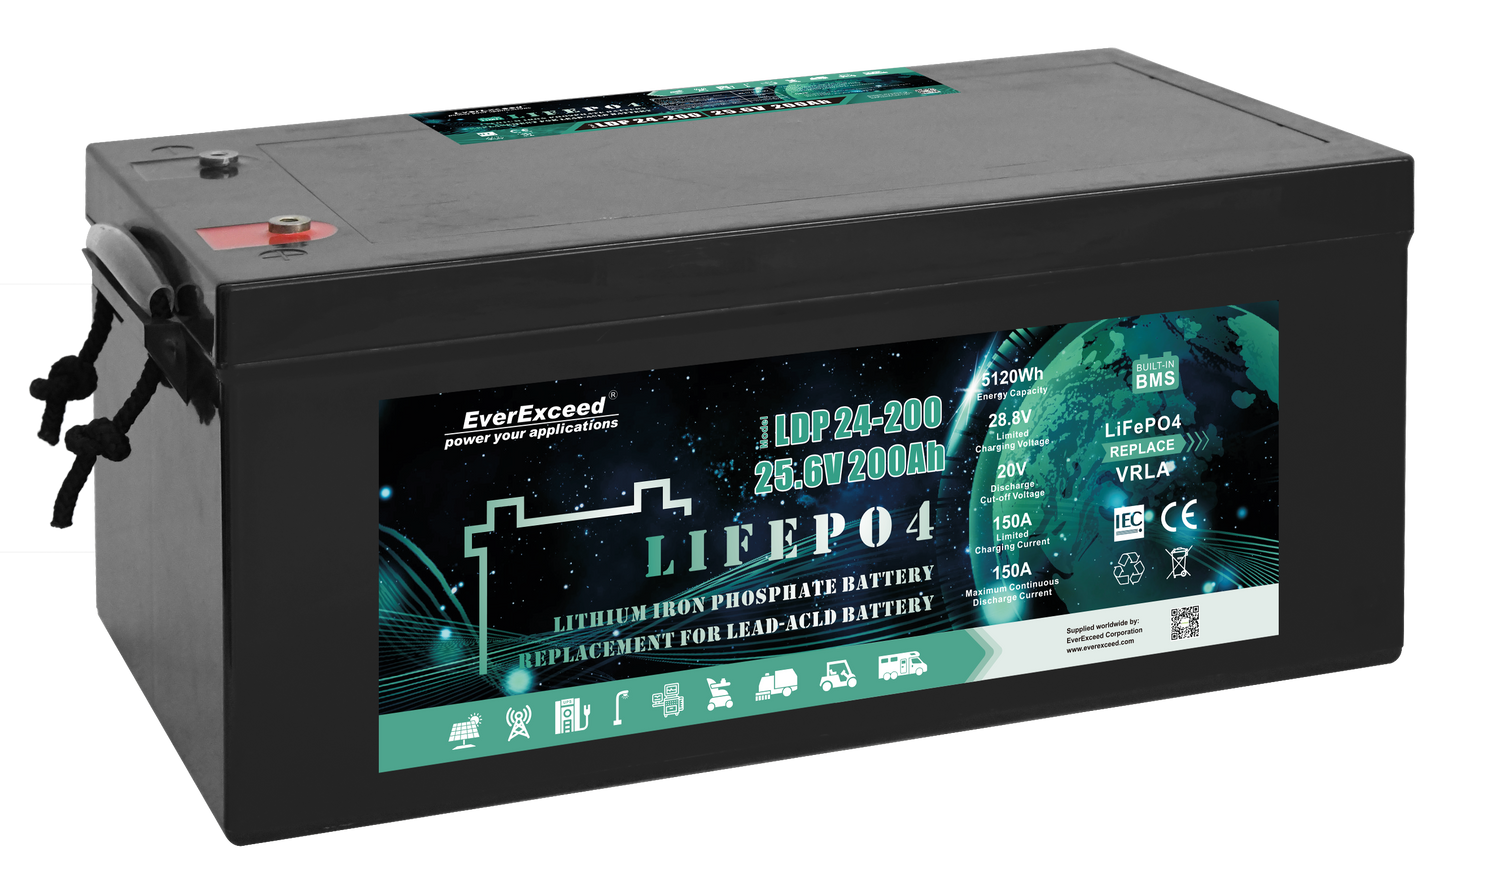 EverExceed 24V 200Ah LiFePO4 Scooter Battery for Lead Acid Replacement